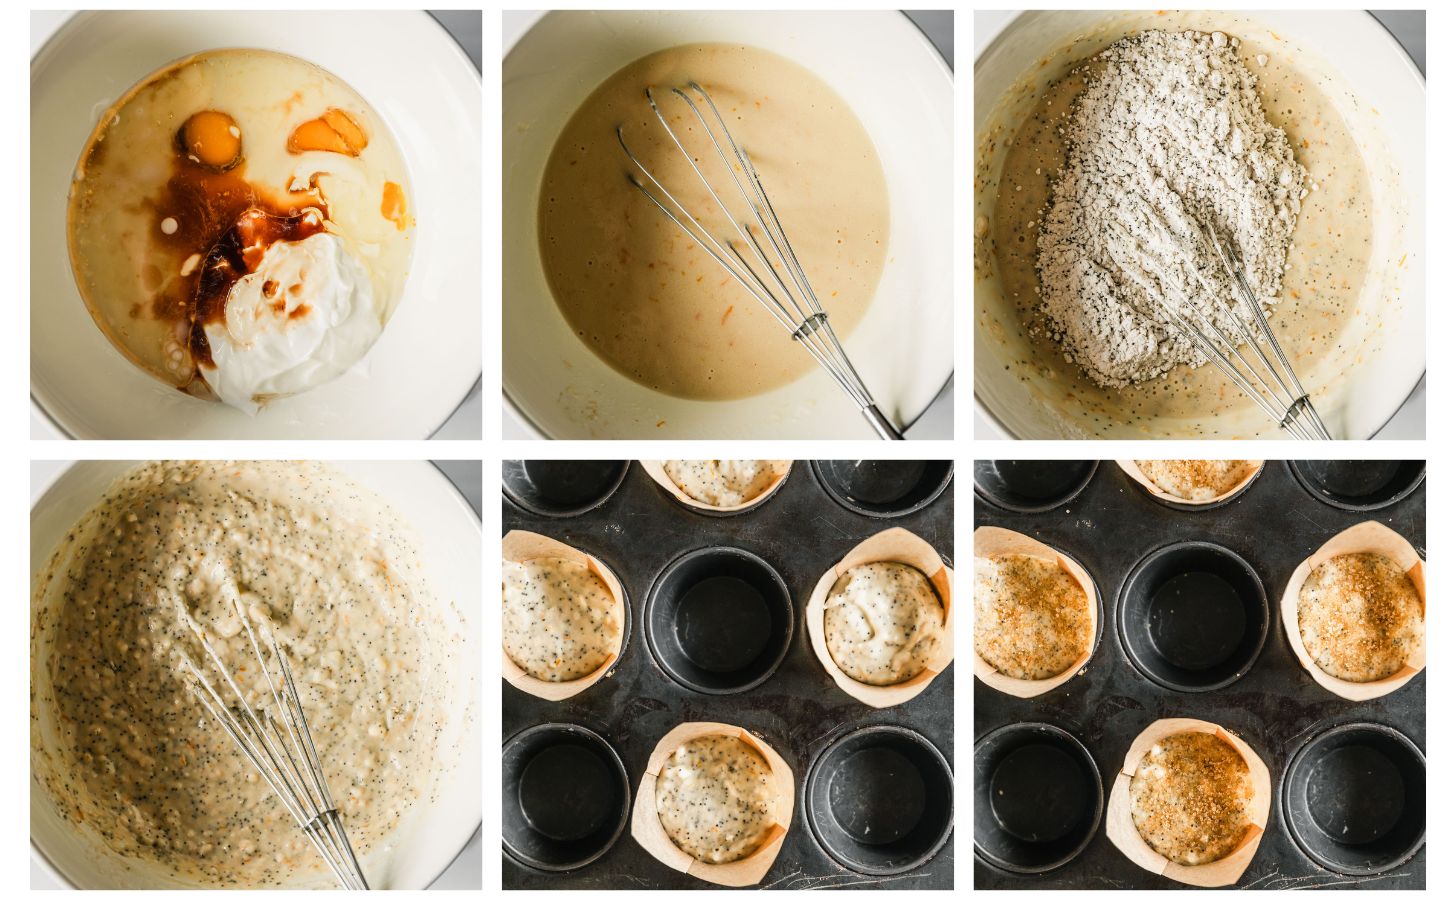 Six steps to making orange poppy seed muffins. In photo 1, a white bowl has sugar, oil, eggs, vanilla, and yogurt. In photo 2, the mixture is whisked. In photo 3, the bowl has flour in it. In photo 4, the bowl has batter in it. In photo 5, the batter is divided between muffin liners in a pan. In photo 6, the muffins are topped with raw sugar.